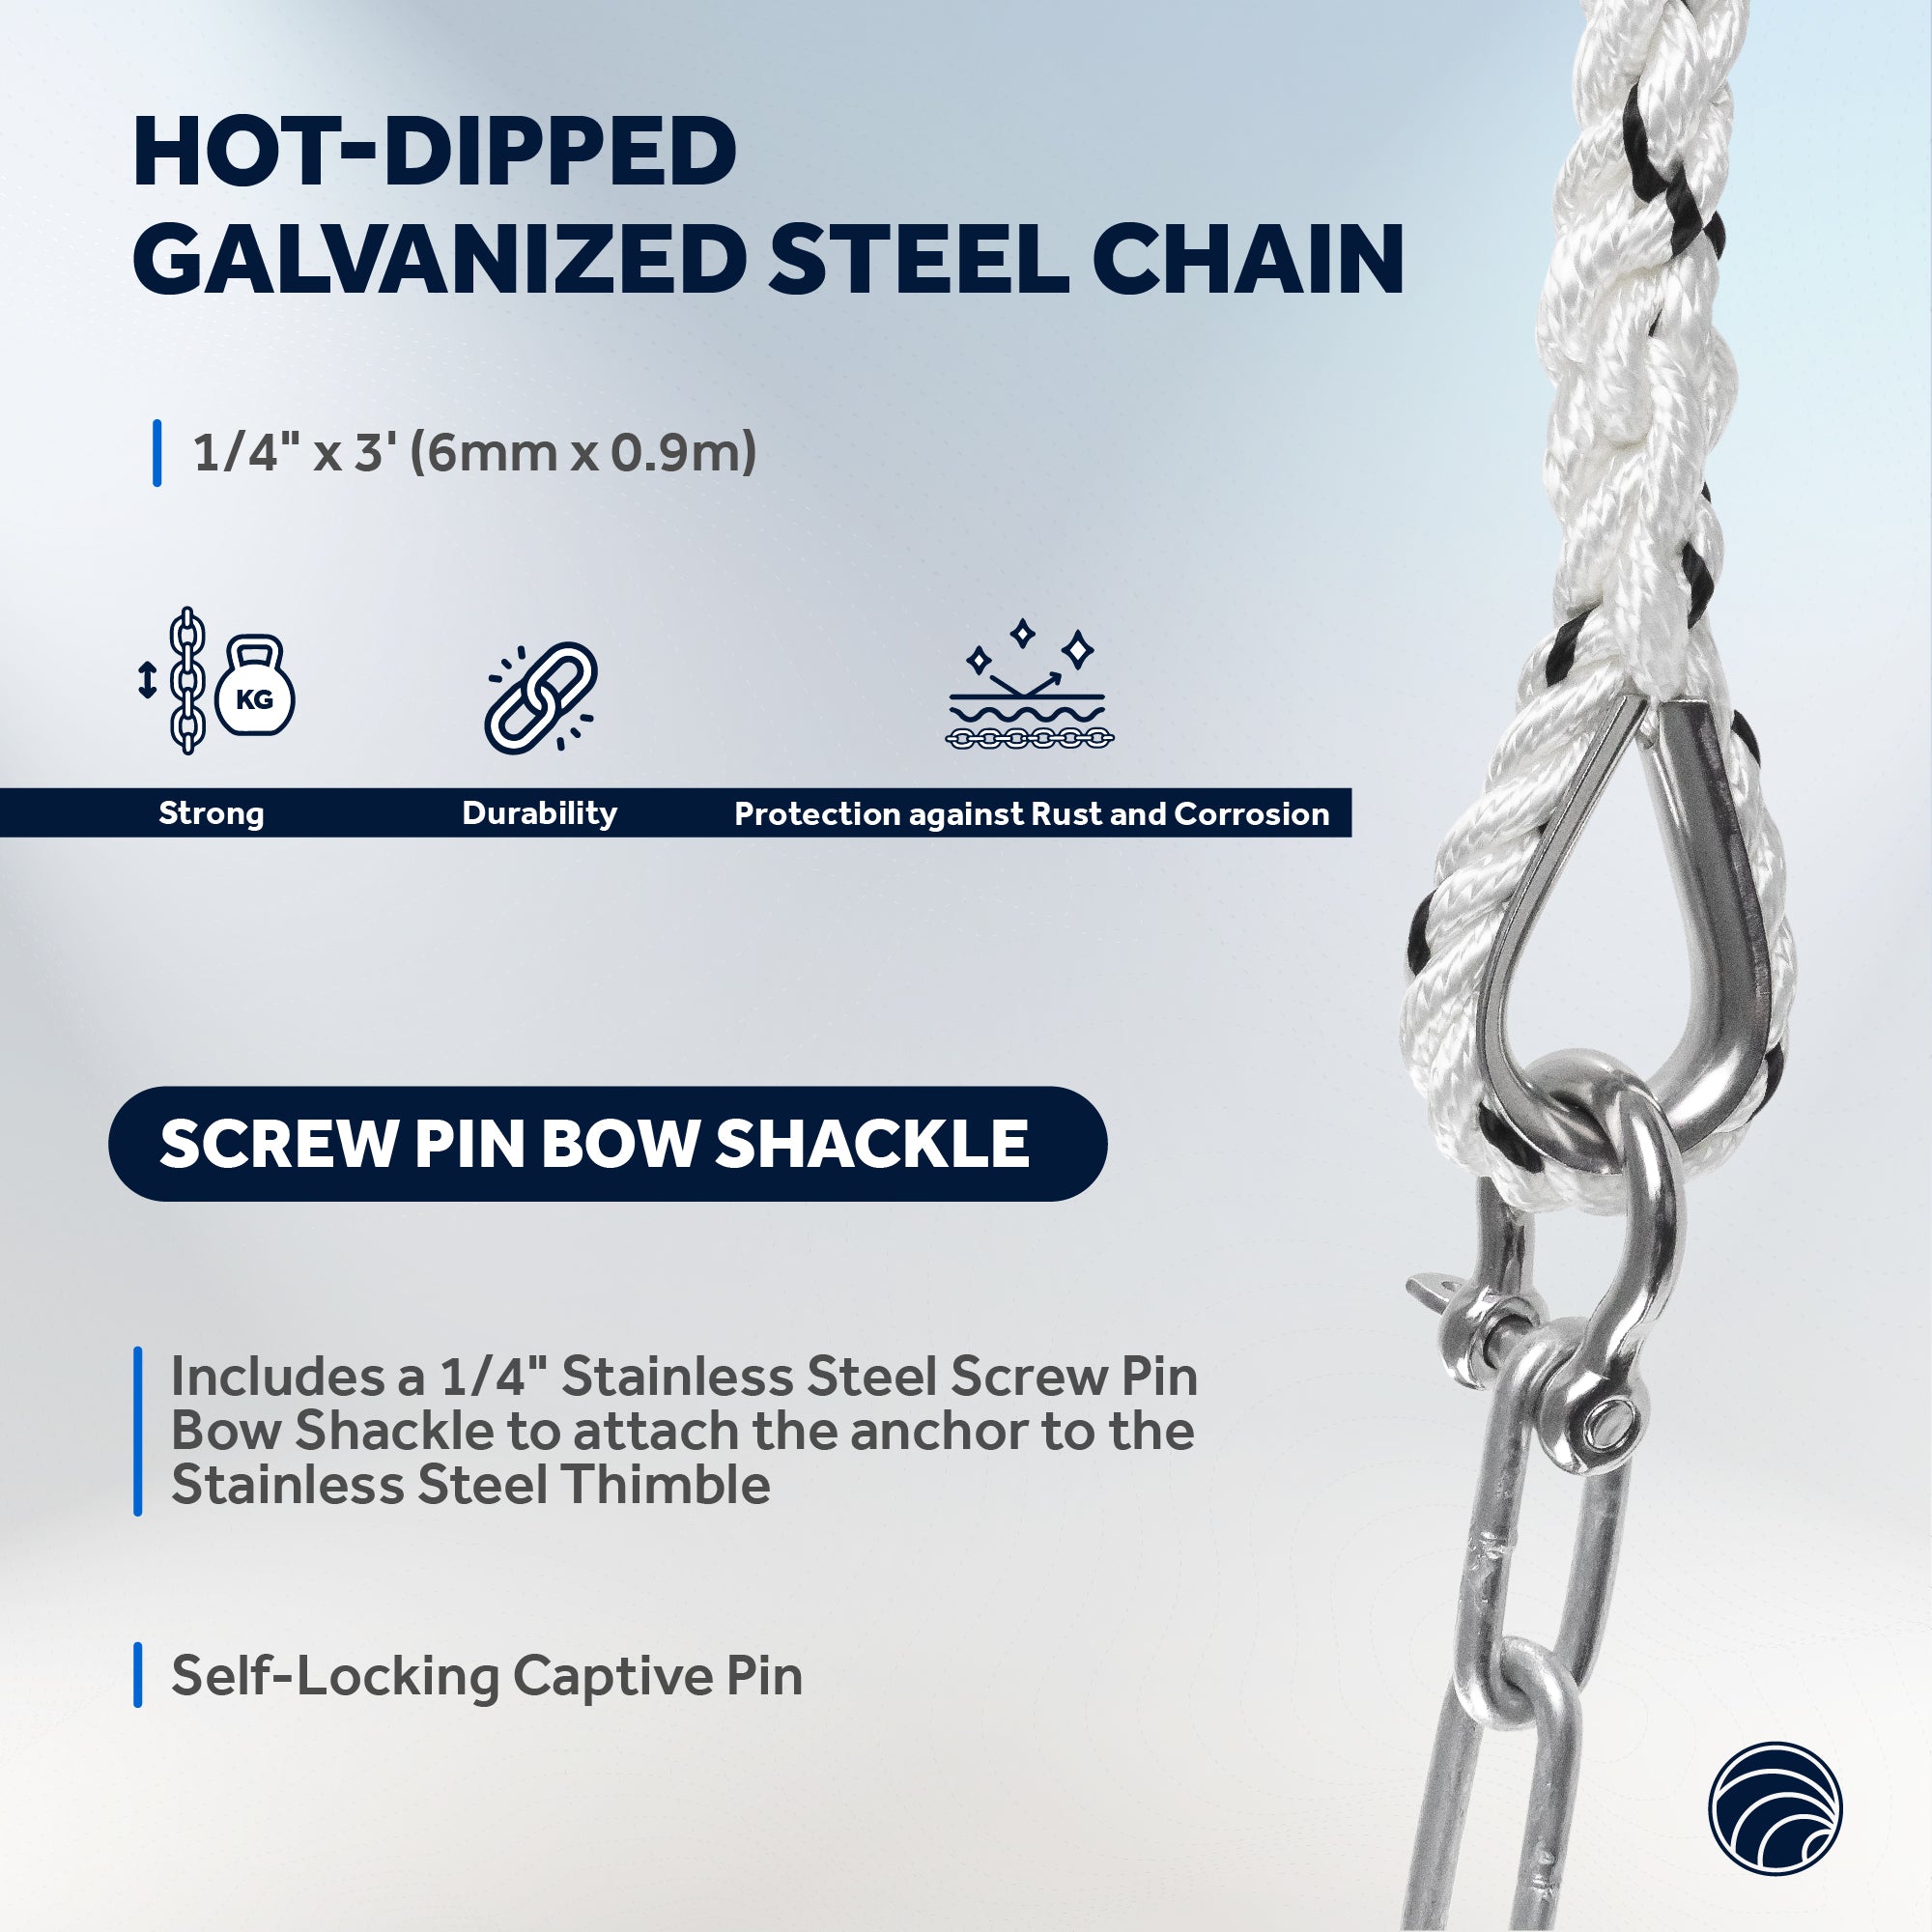 Anchor Rode, 3/8" x 100' Nylon 3-Strand Rope, 1/4" x 3' Hot Dipped Galvanized Steel Chain - FO4577